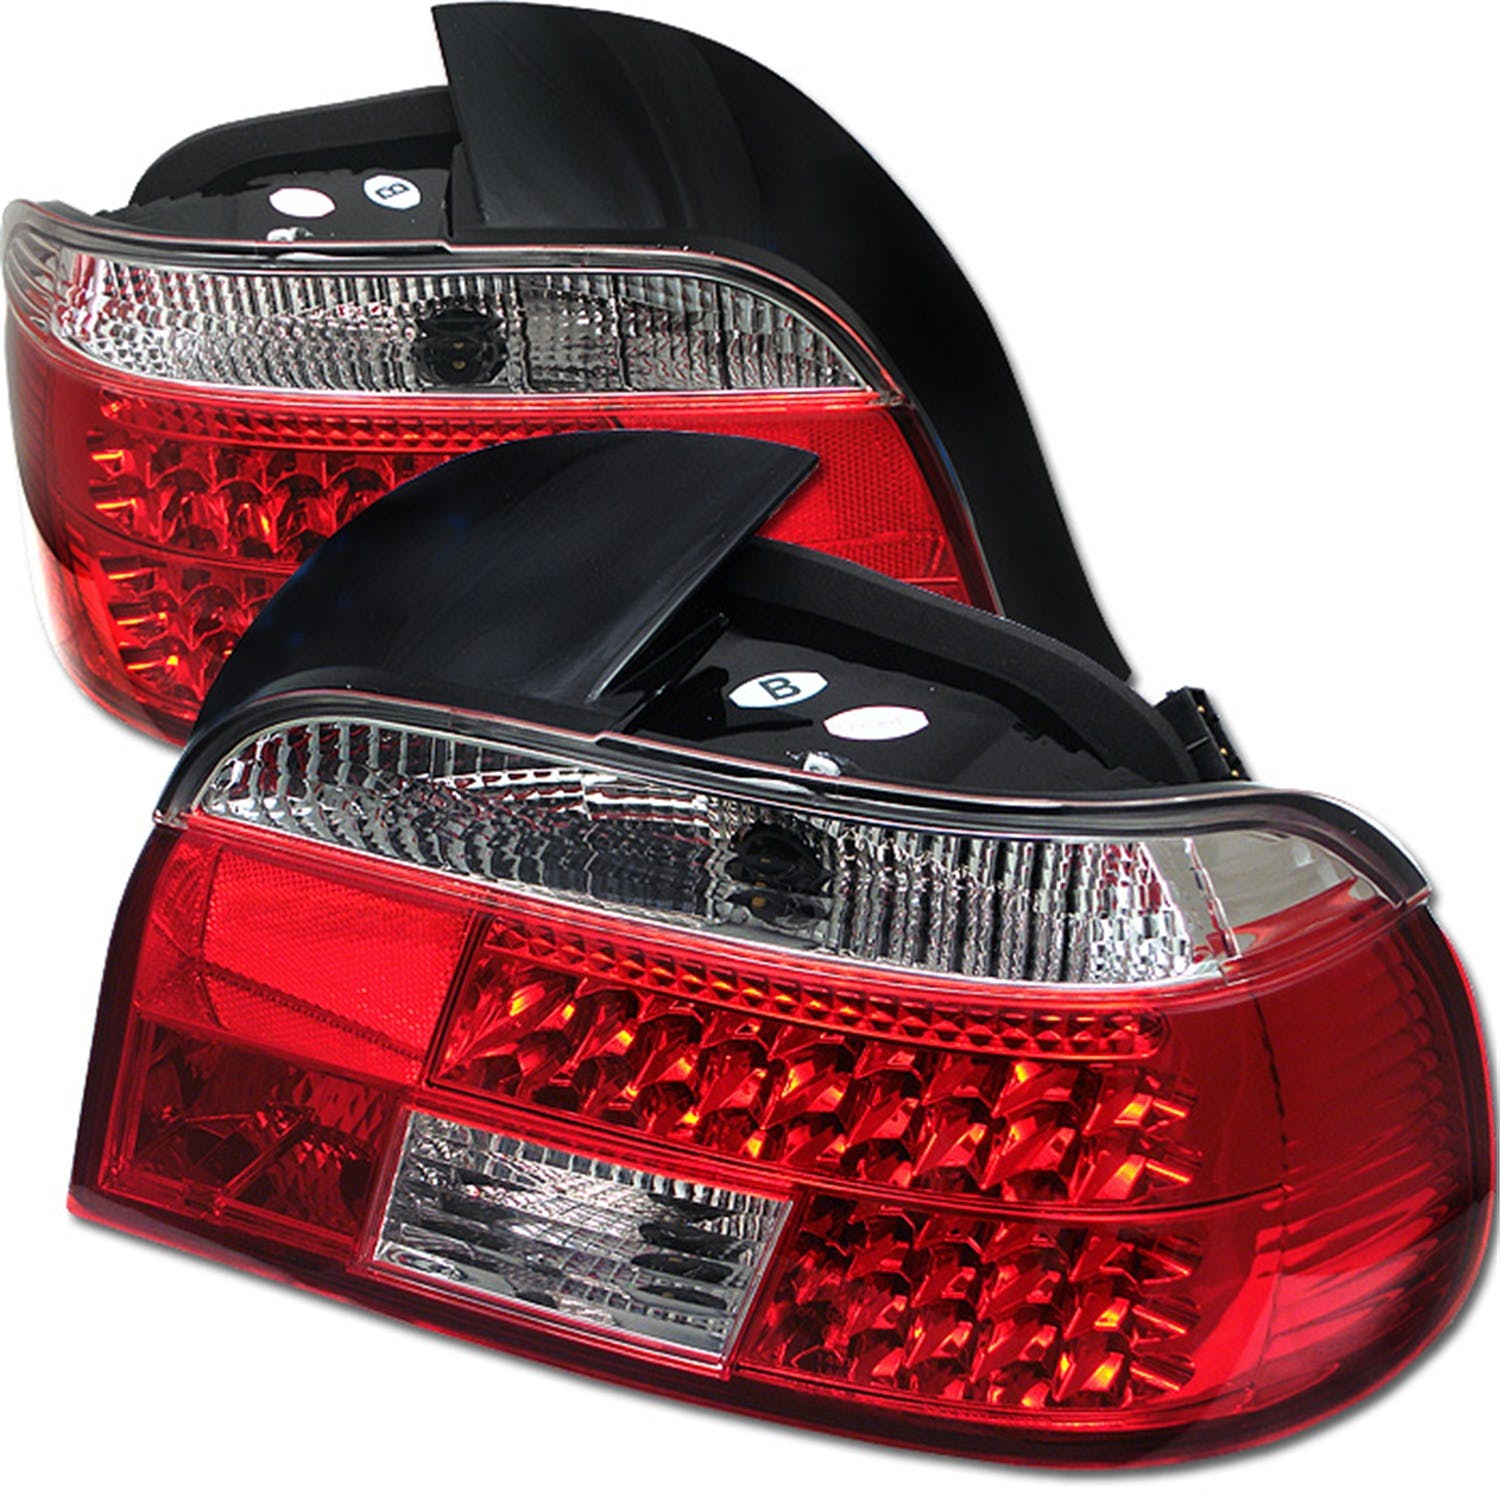 Spyder Auto 5000675 (Spyder) BMW E39 5-Series 97-00 LED Tail Lights-Red Clear